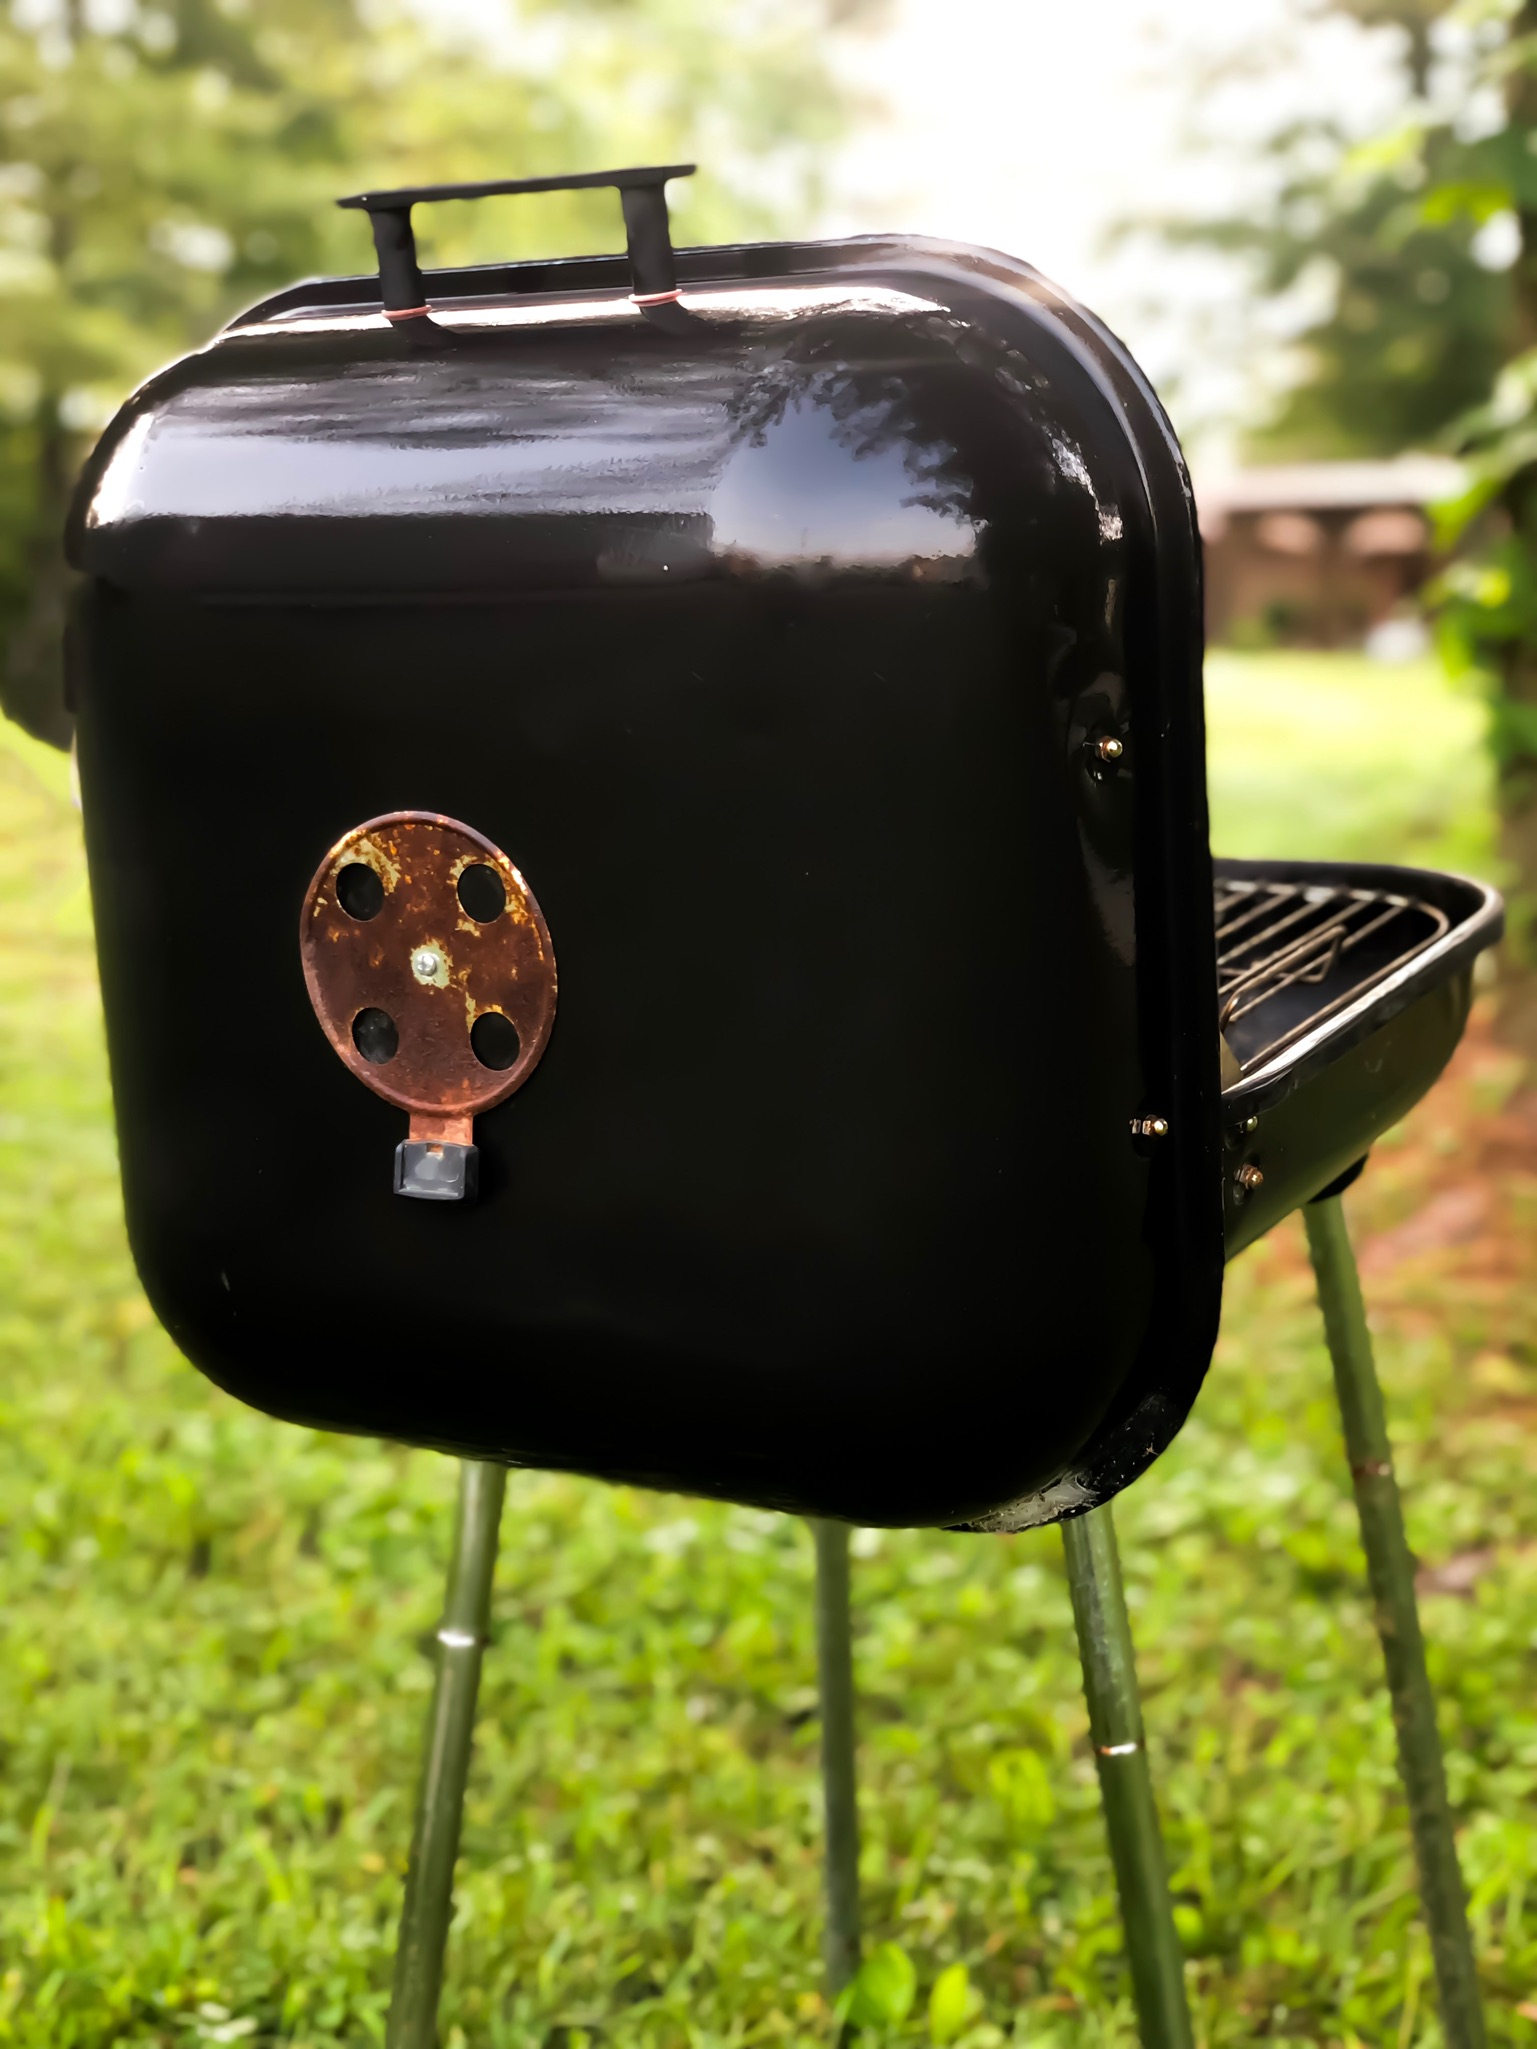 Cookout safety tips for holiday and summer picnics